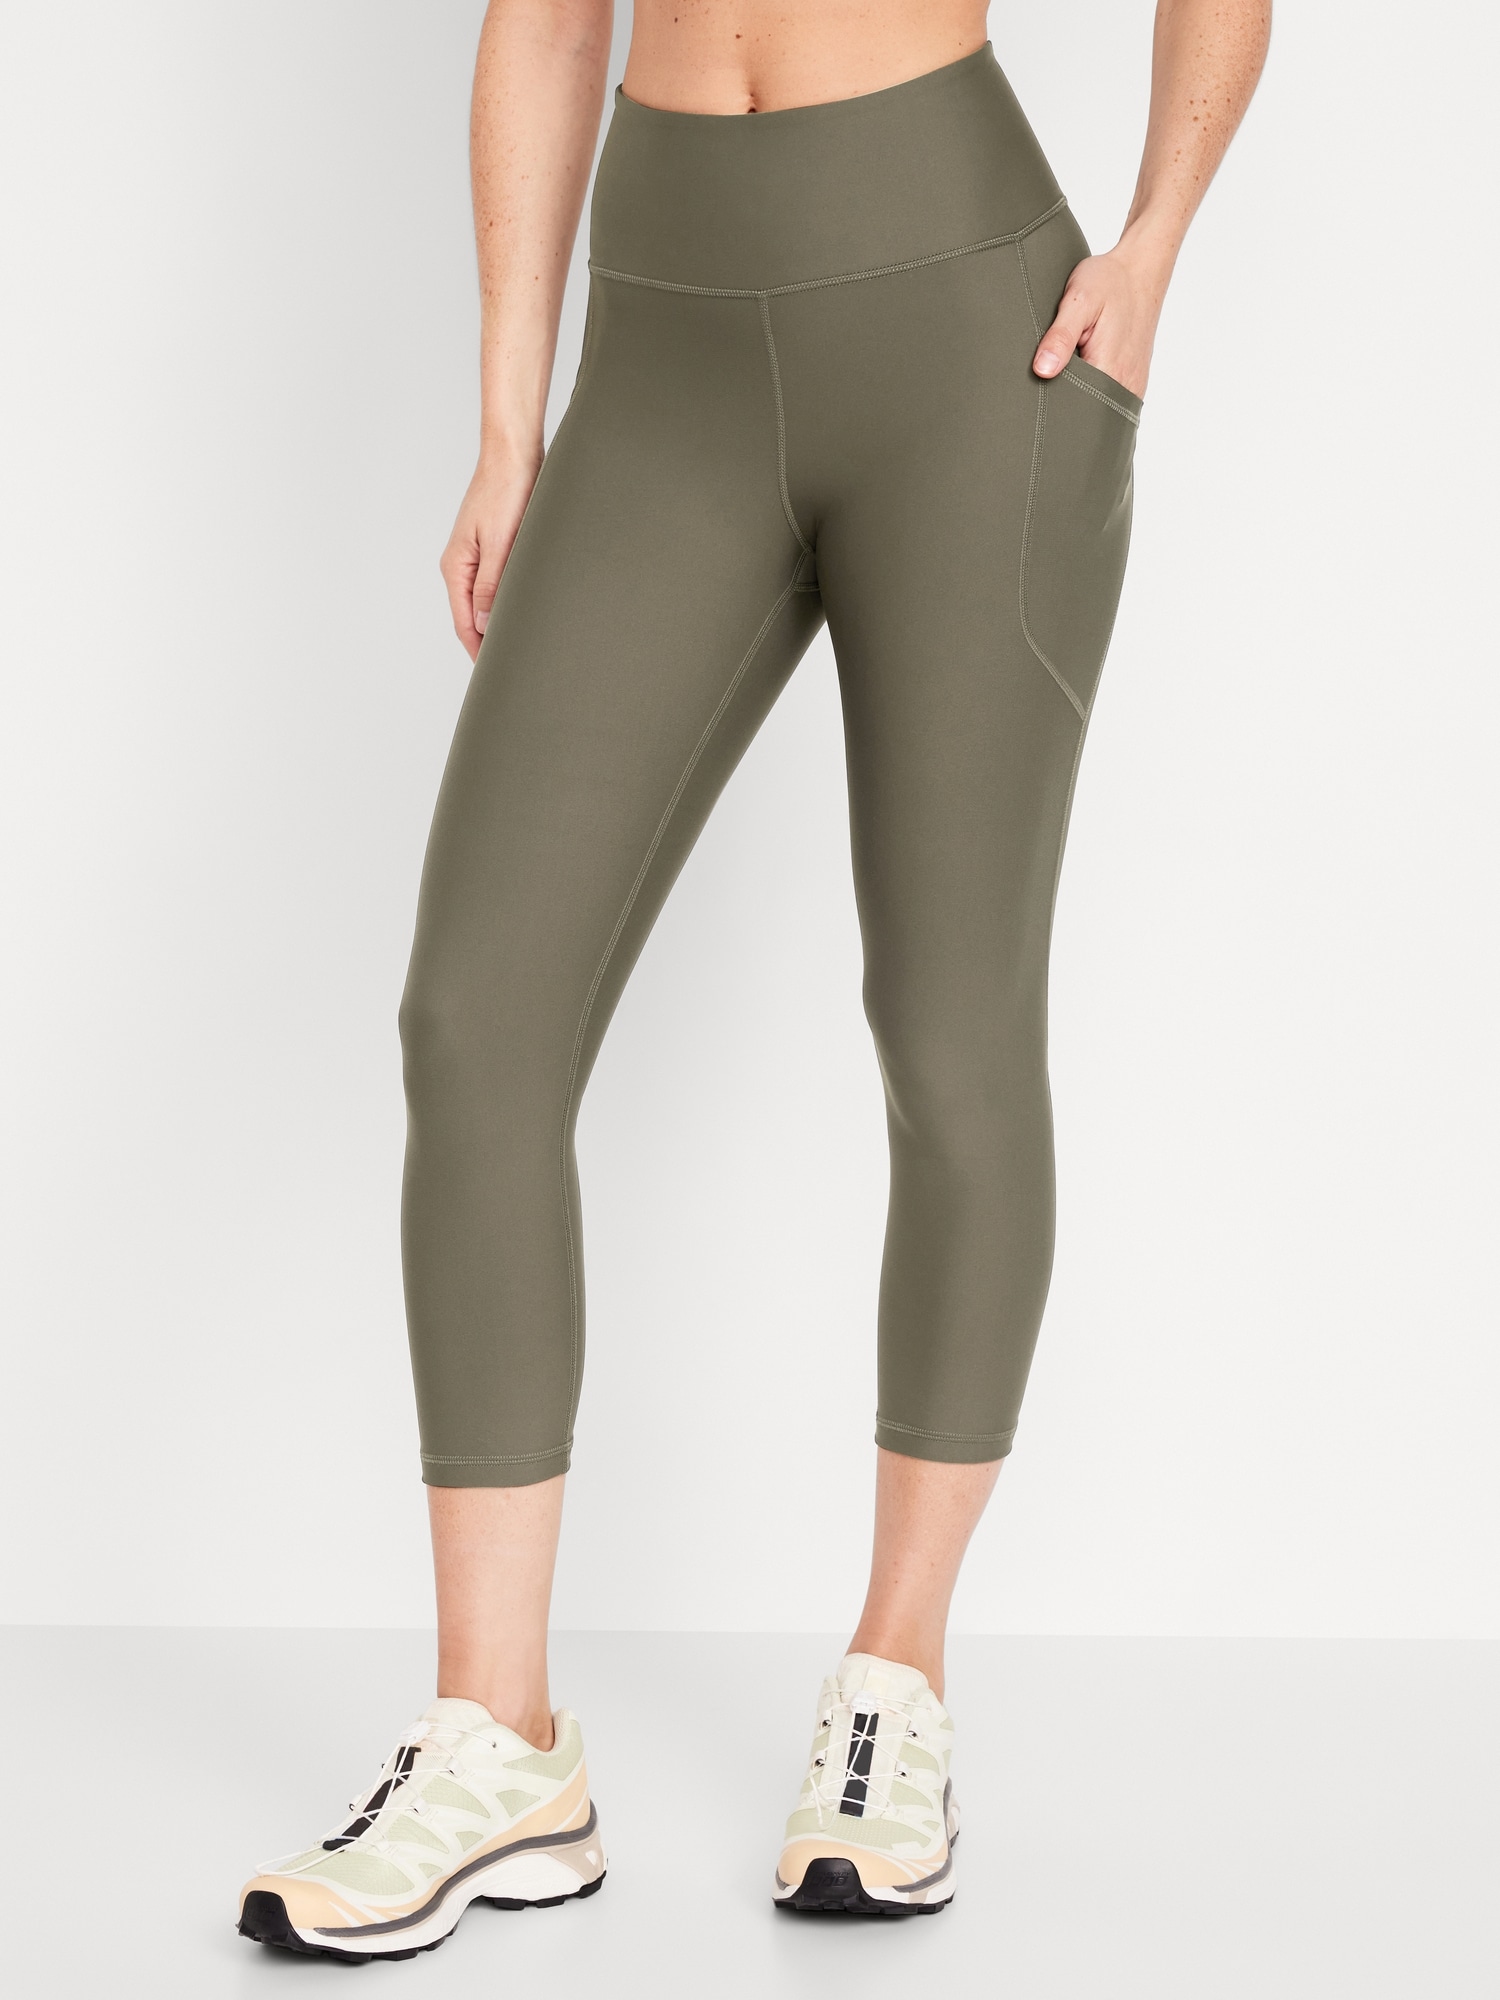 Women's Cropped Athletic Pants